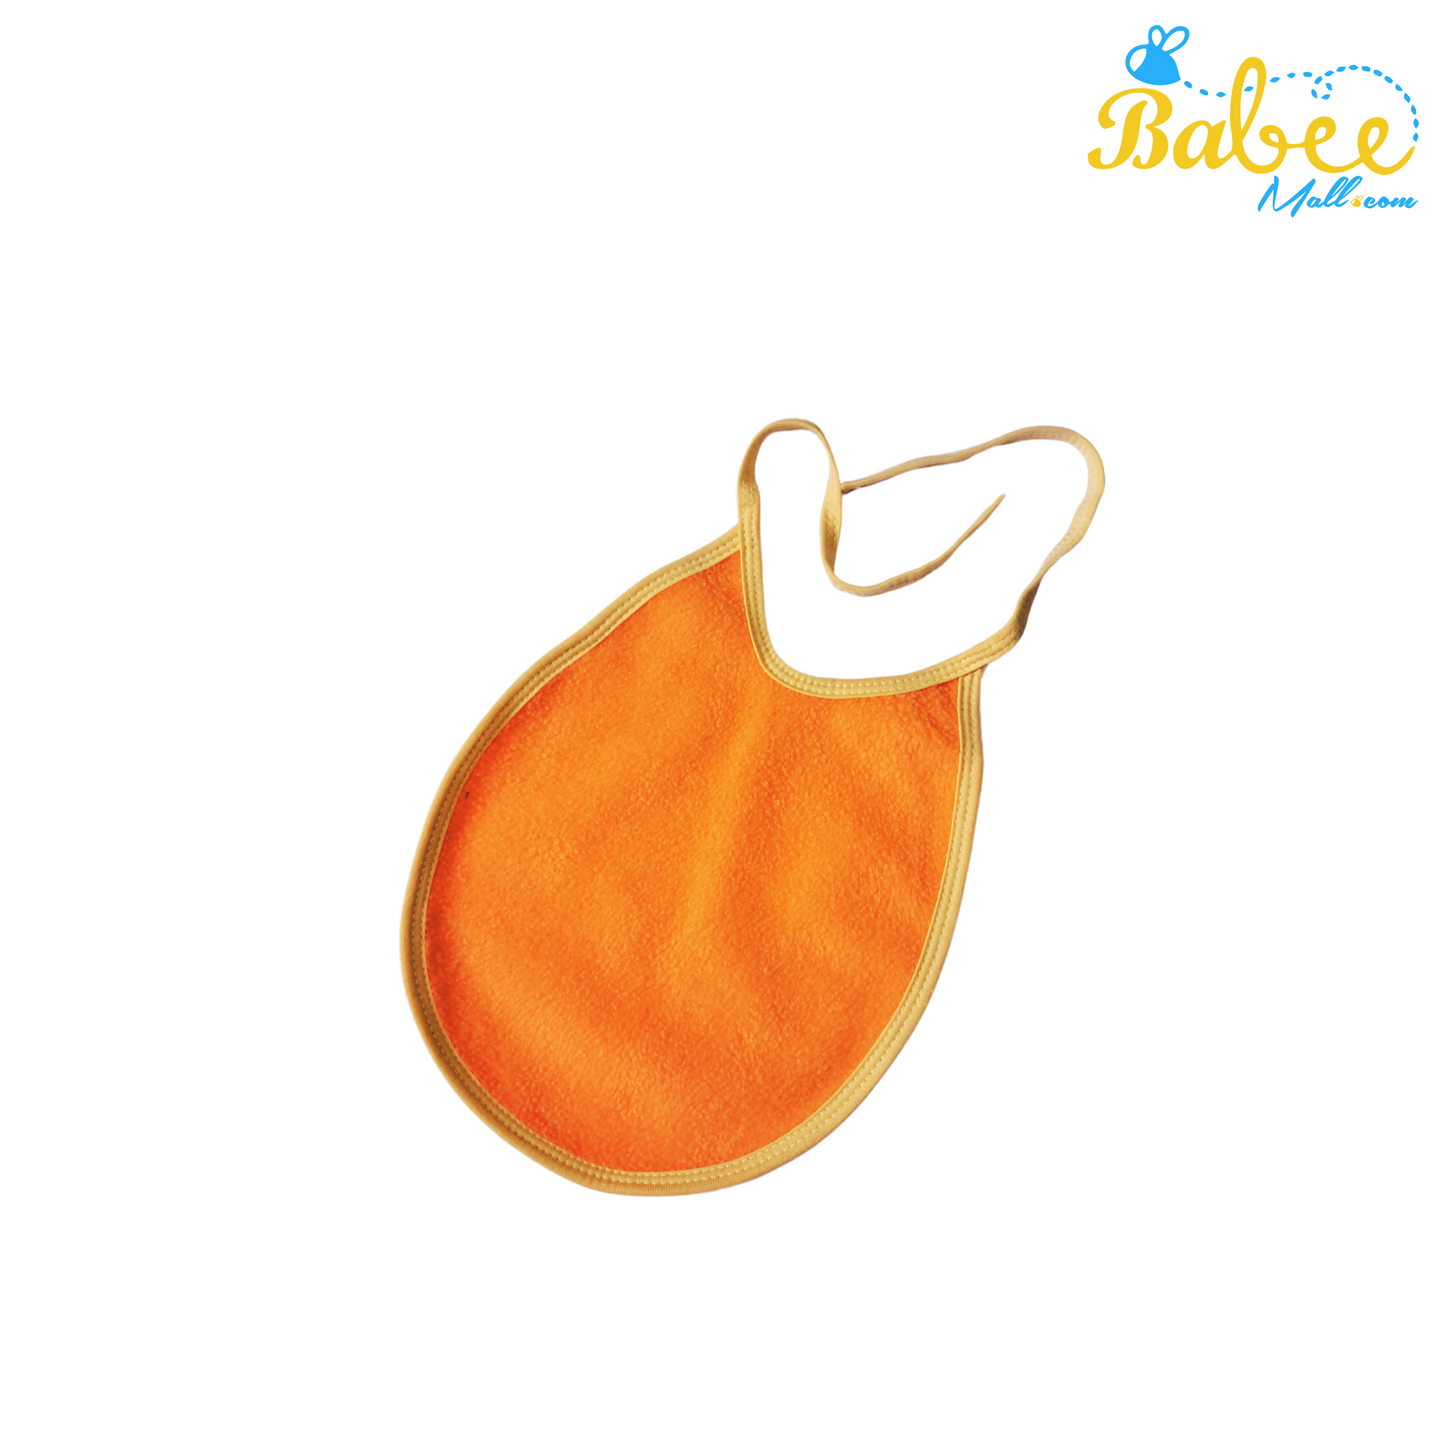 Soft and Stylish Baby Bibs - Mess-Free Meals (Peach)